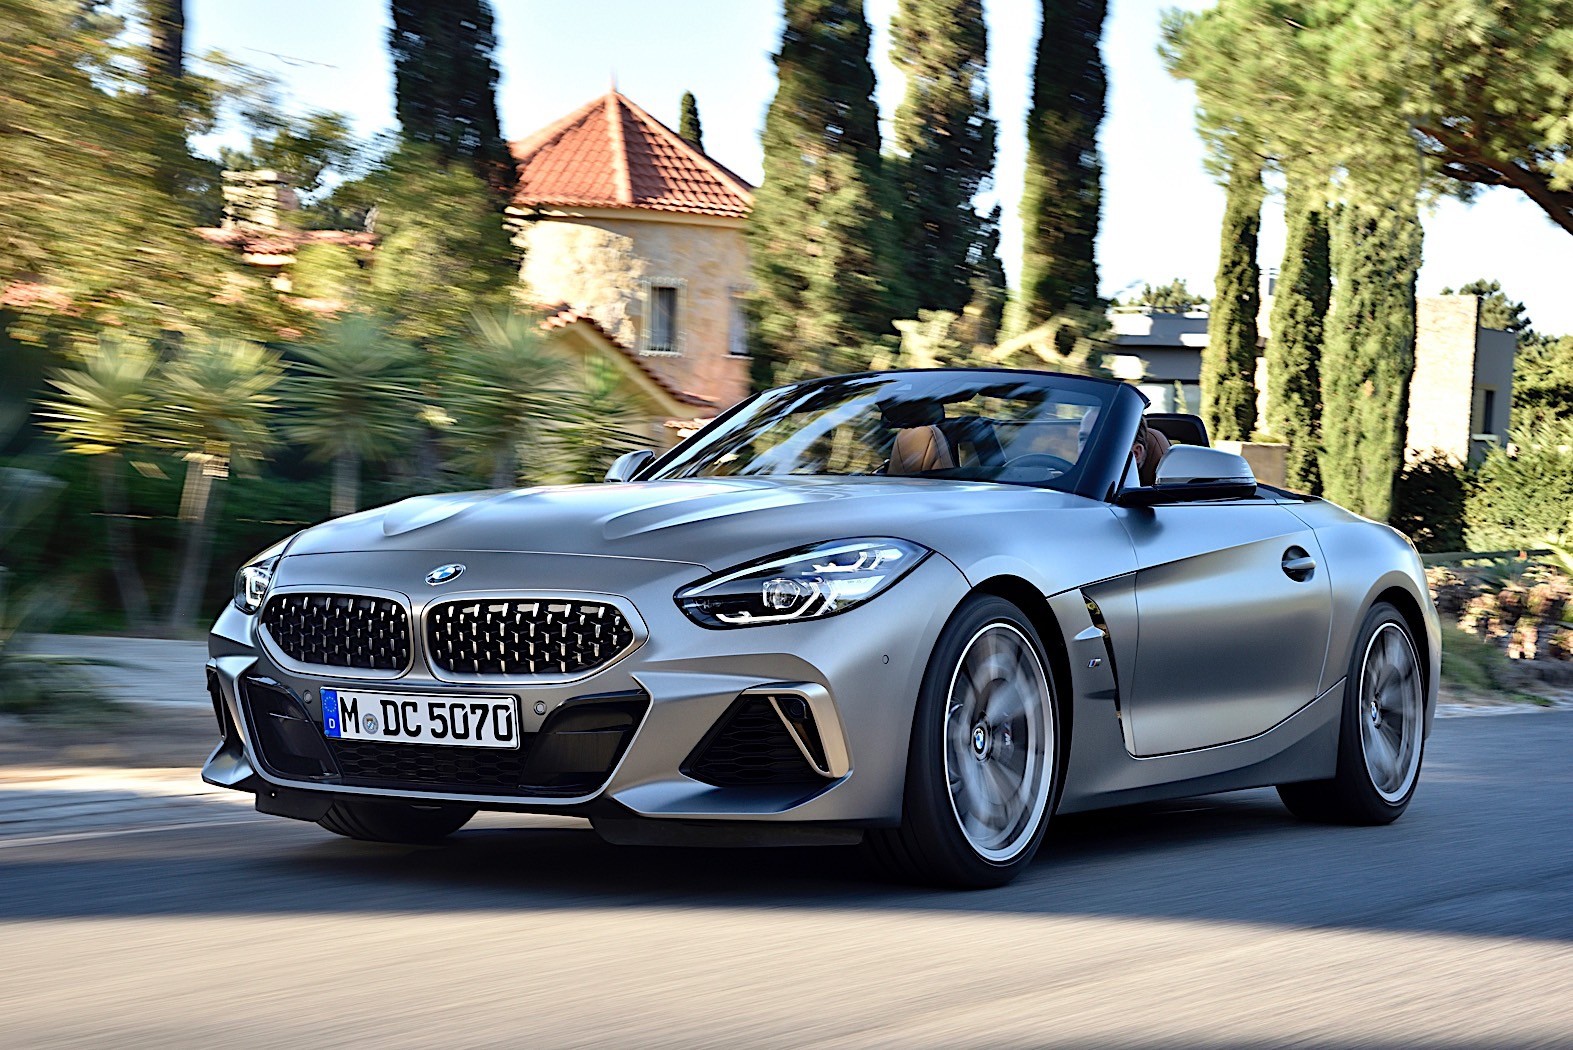 2020 BMW Z4 Roadster Shows Stunning Details in New Photo Shoot